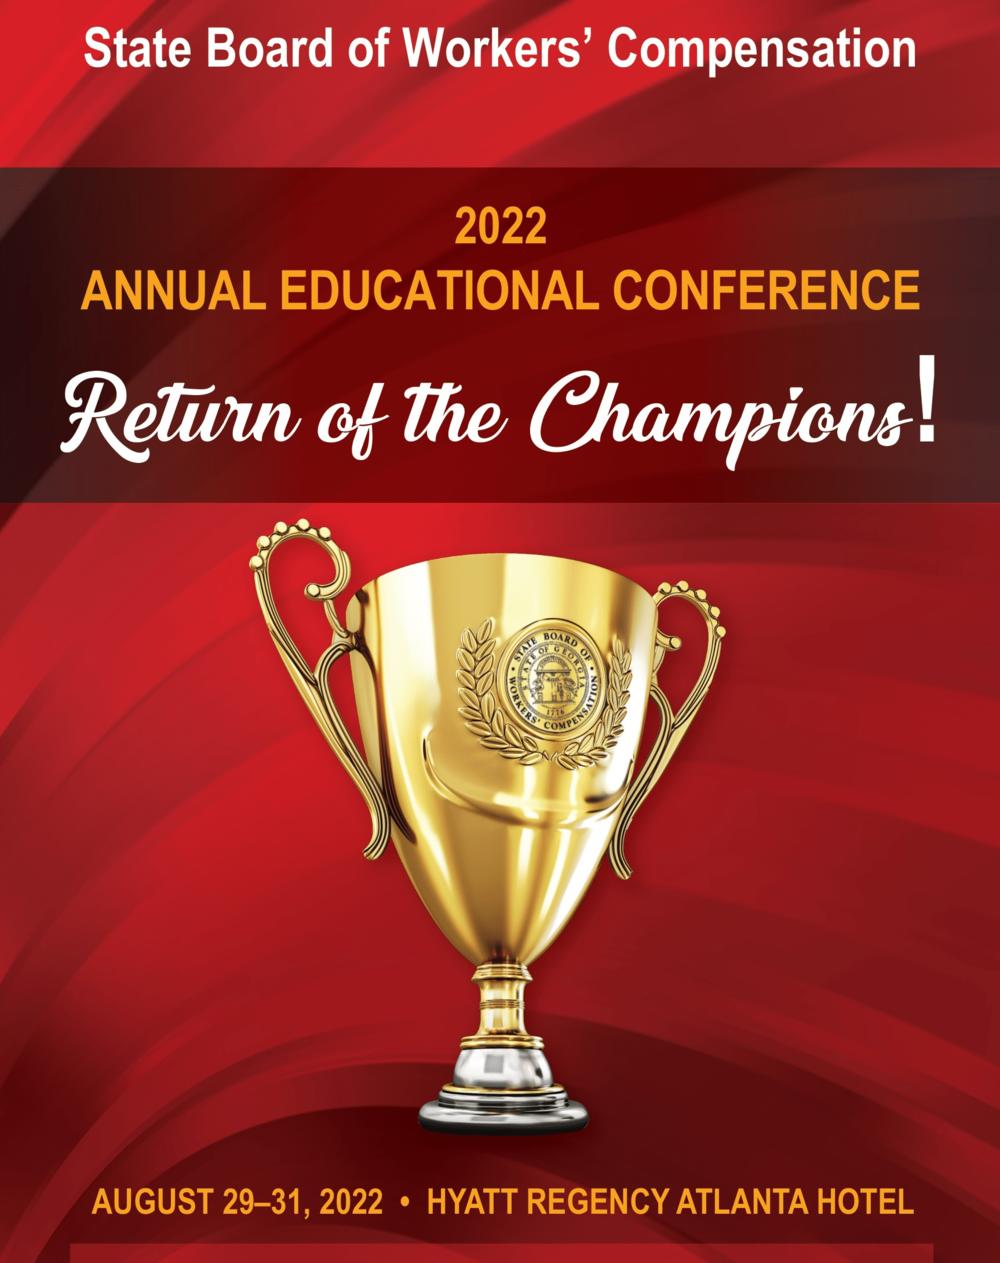 2022 Annual Educational Conference - Return of the Champions!